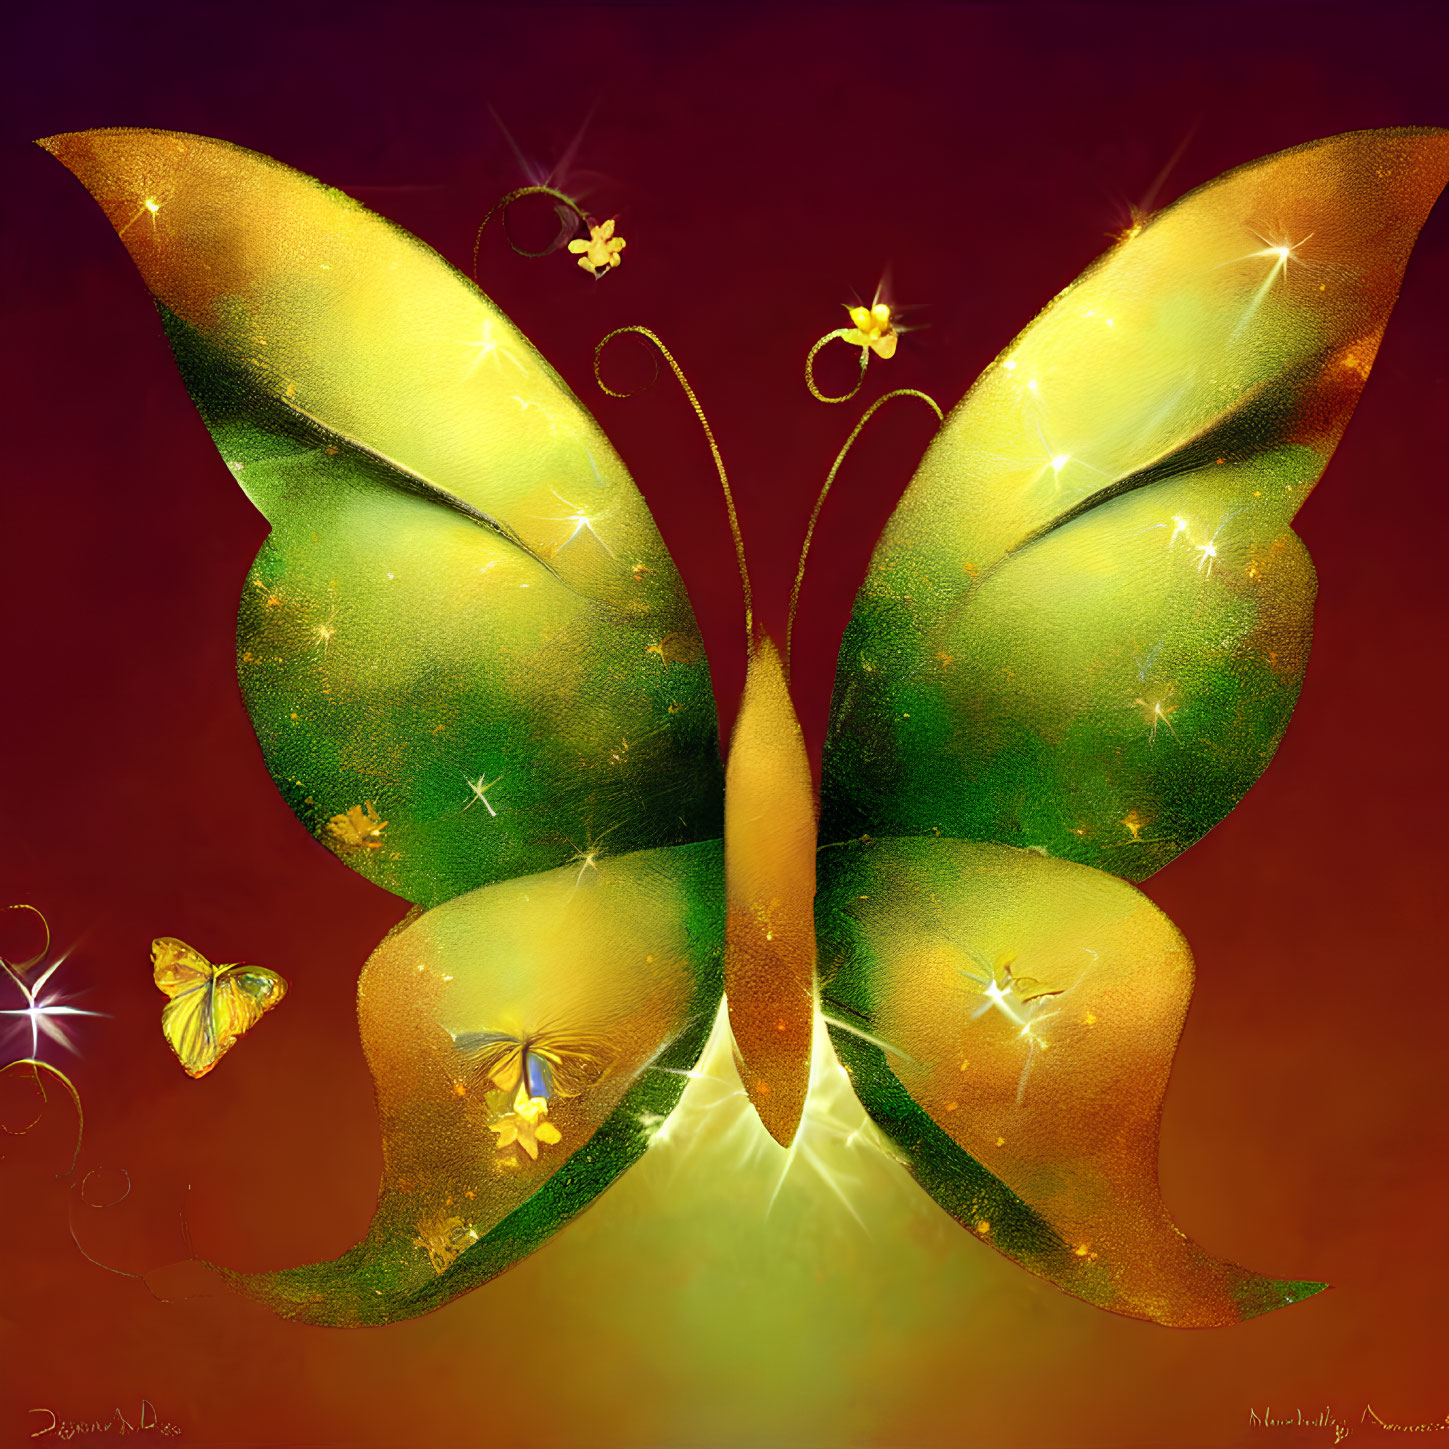 Colorful Butterfly Artwork with Glowing Wings and Stars on Red Background